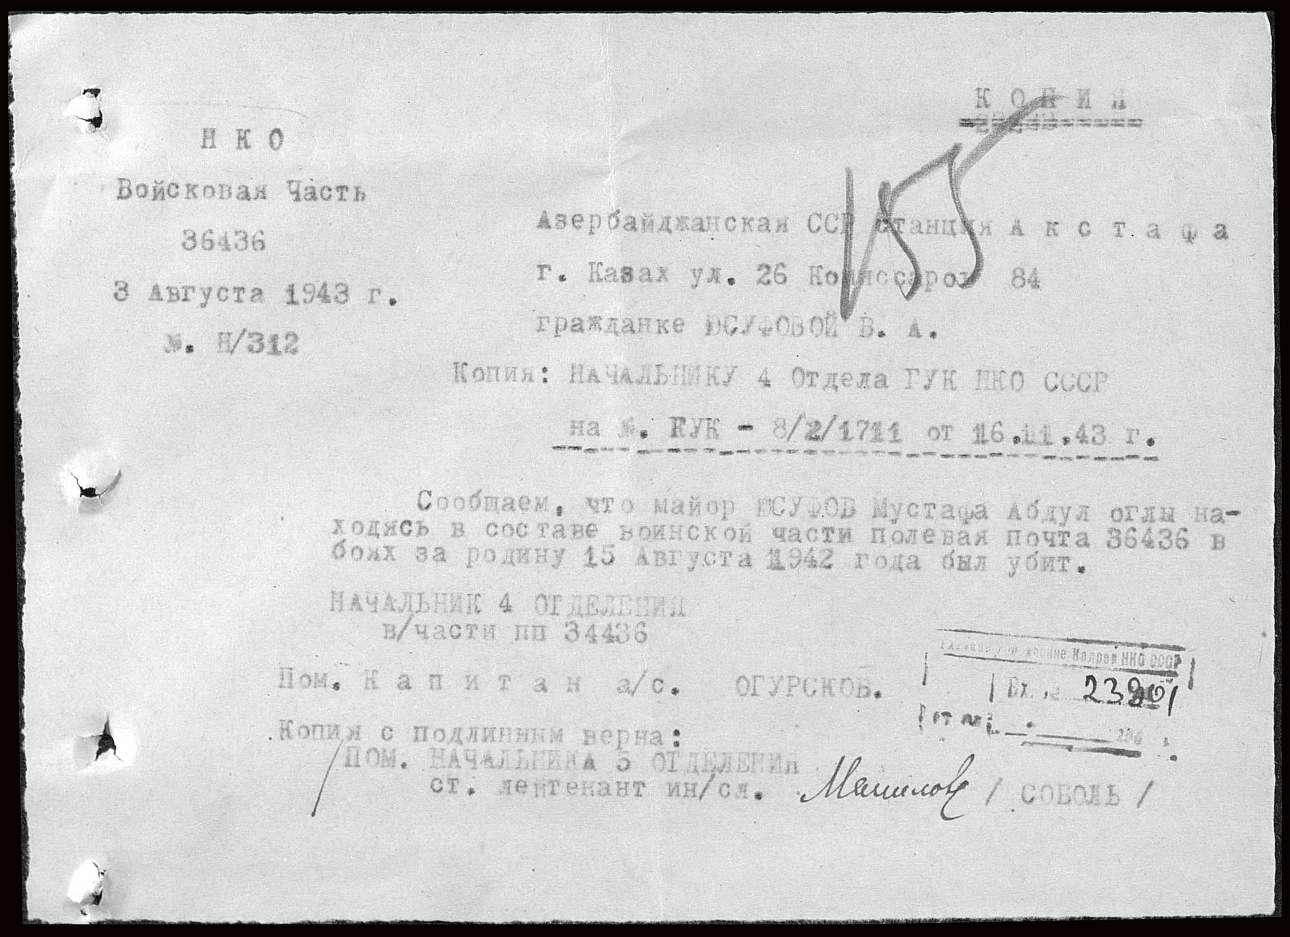 This is to let you know that major Yusufov Mustafa Abdul(la) oglu was killed in the battles for motherland on 15 August 1942. Date: 3 August 1943